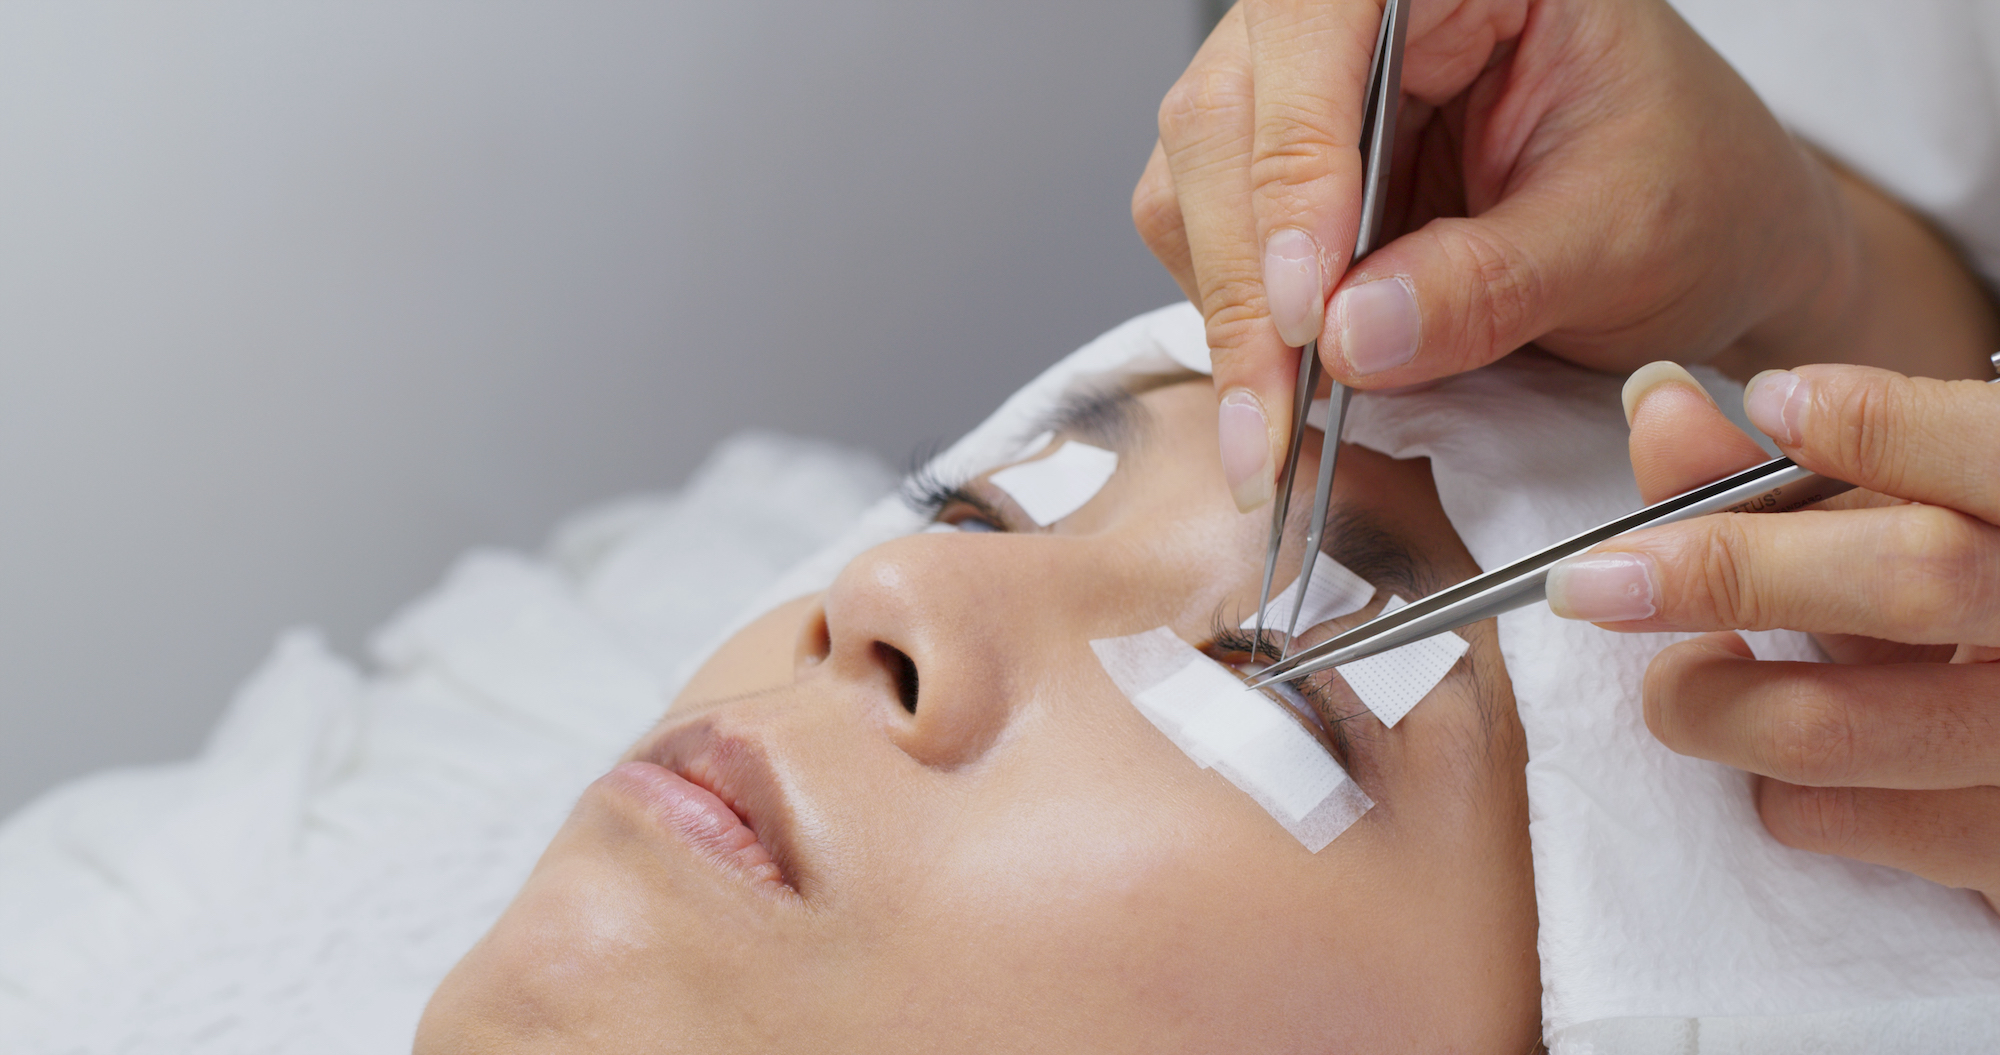 Beautician and young woman in a beauty salon with eye lash extension